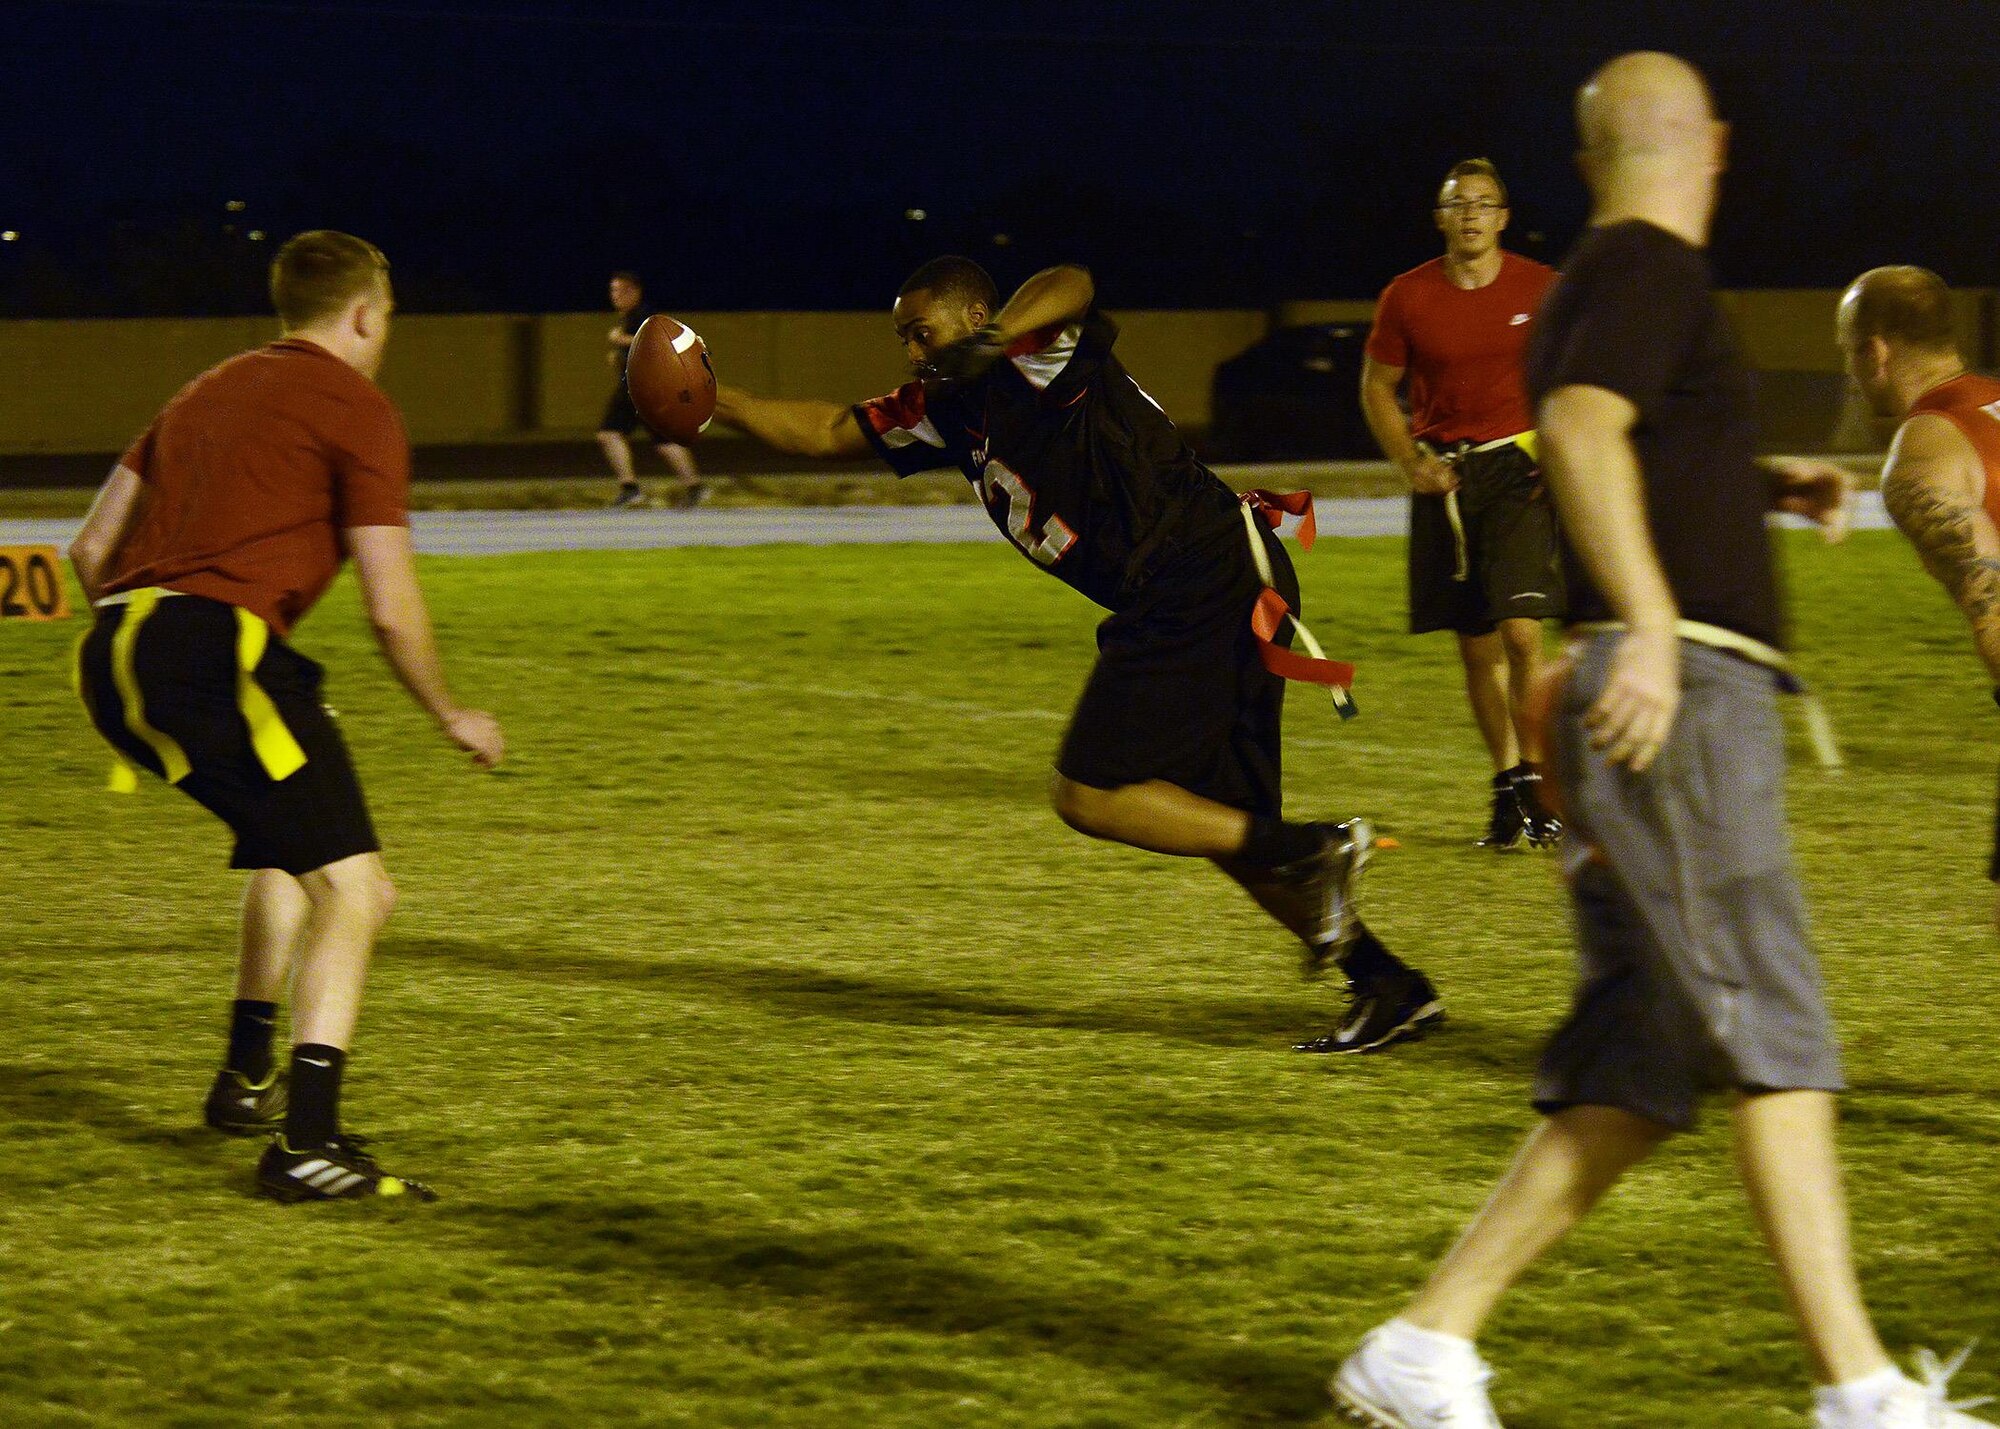 Markeith Wimbush, 56th Security Forces Squadron, runs towards the first down during an in intramural flag football game against 56th Equipment Maintenance Squadron/AMMO Sept. 16, 2016 at Luke Air Force Base, Ariz. SFS defeated EMS/AMMO 7-6. (U.S. Air Force photo by Senior Airman Devante Williams)